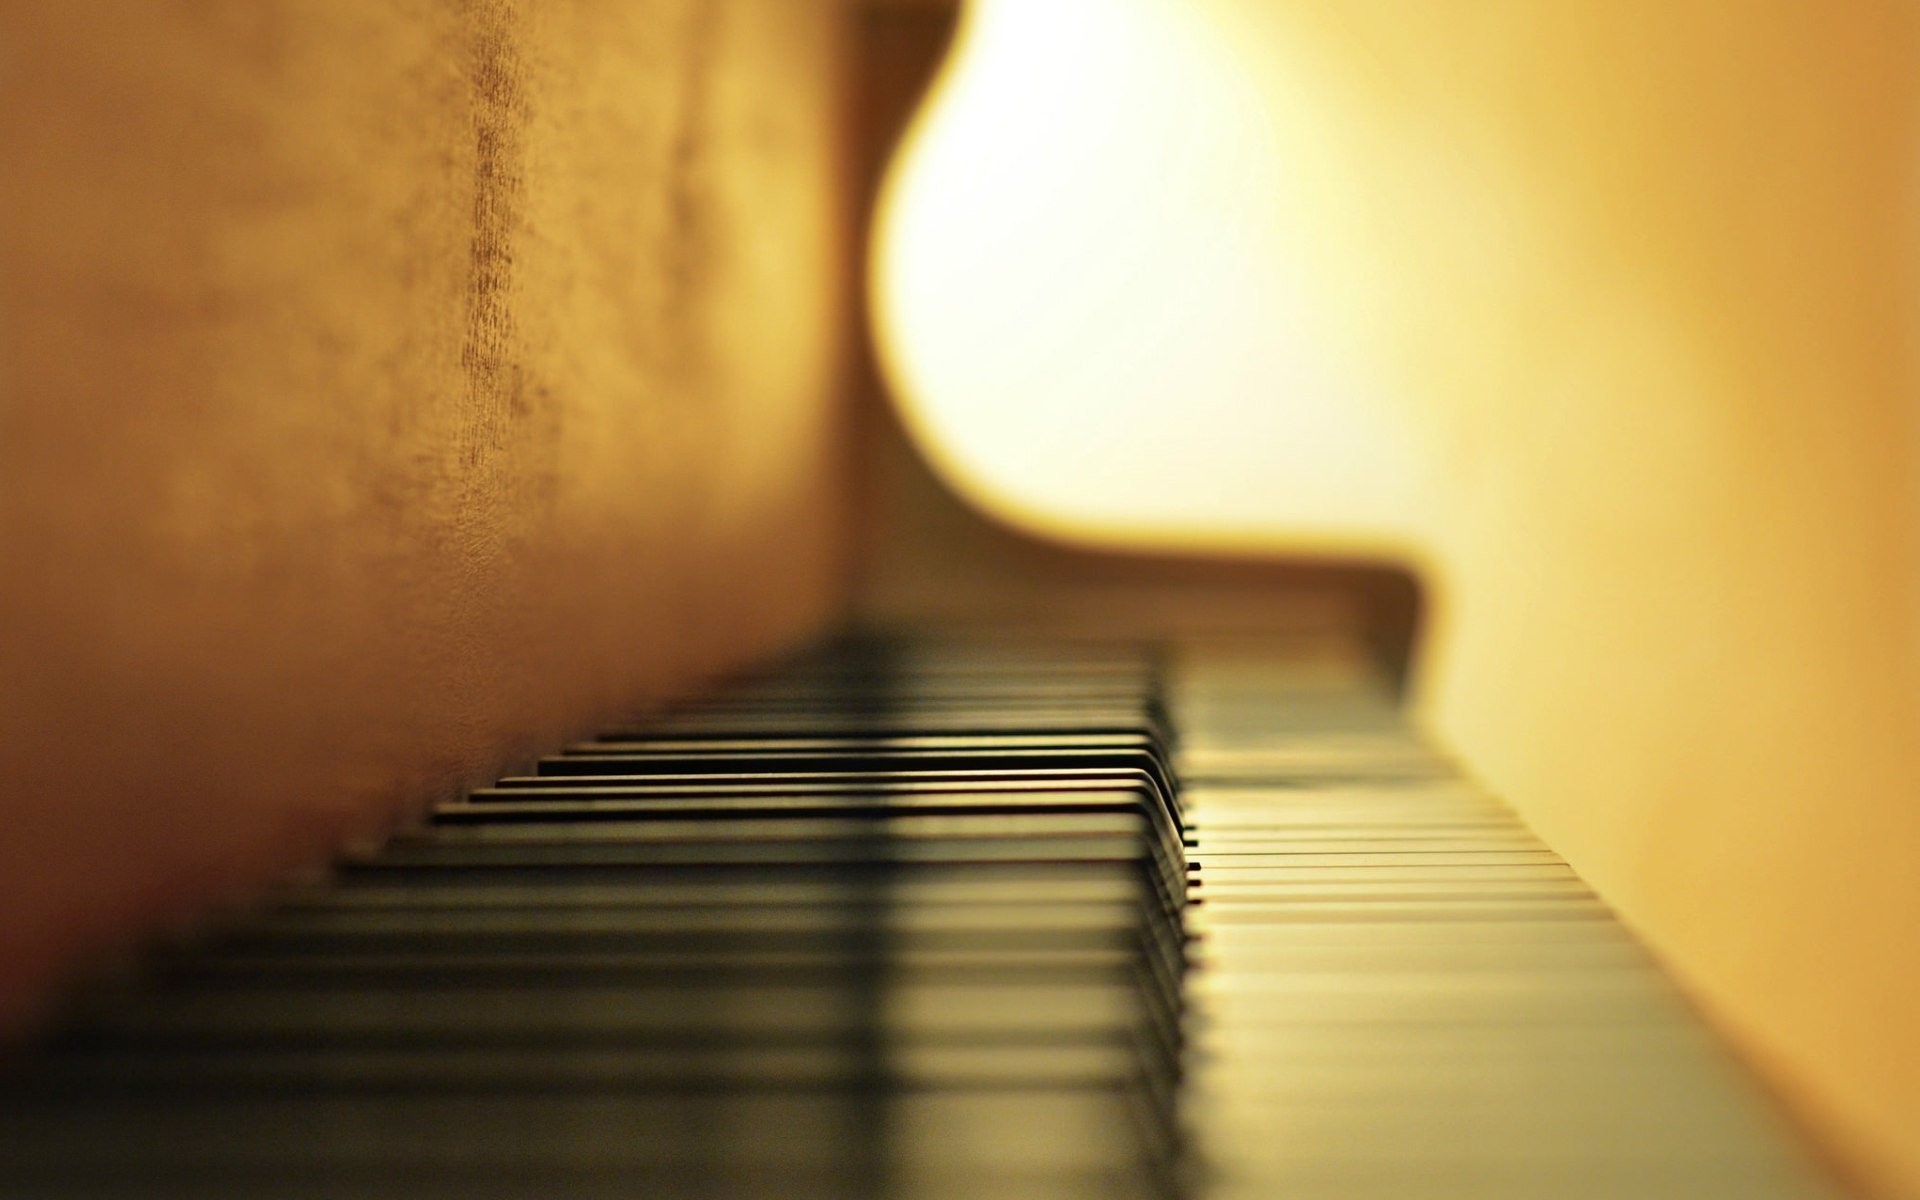 soft piano background music free download